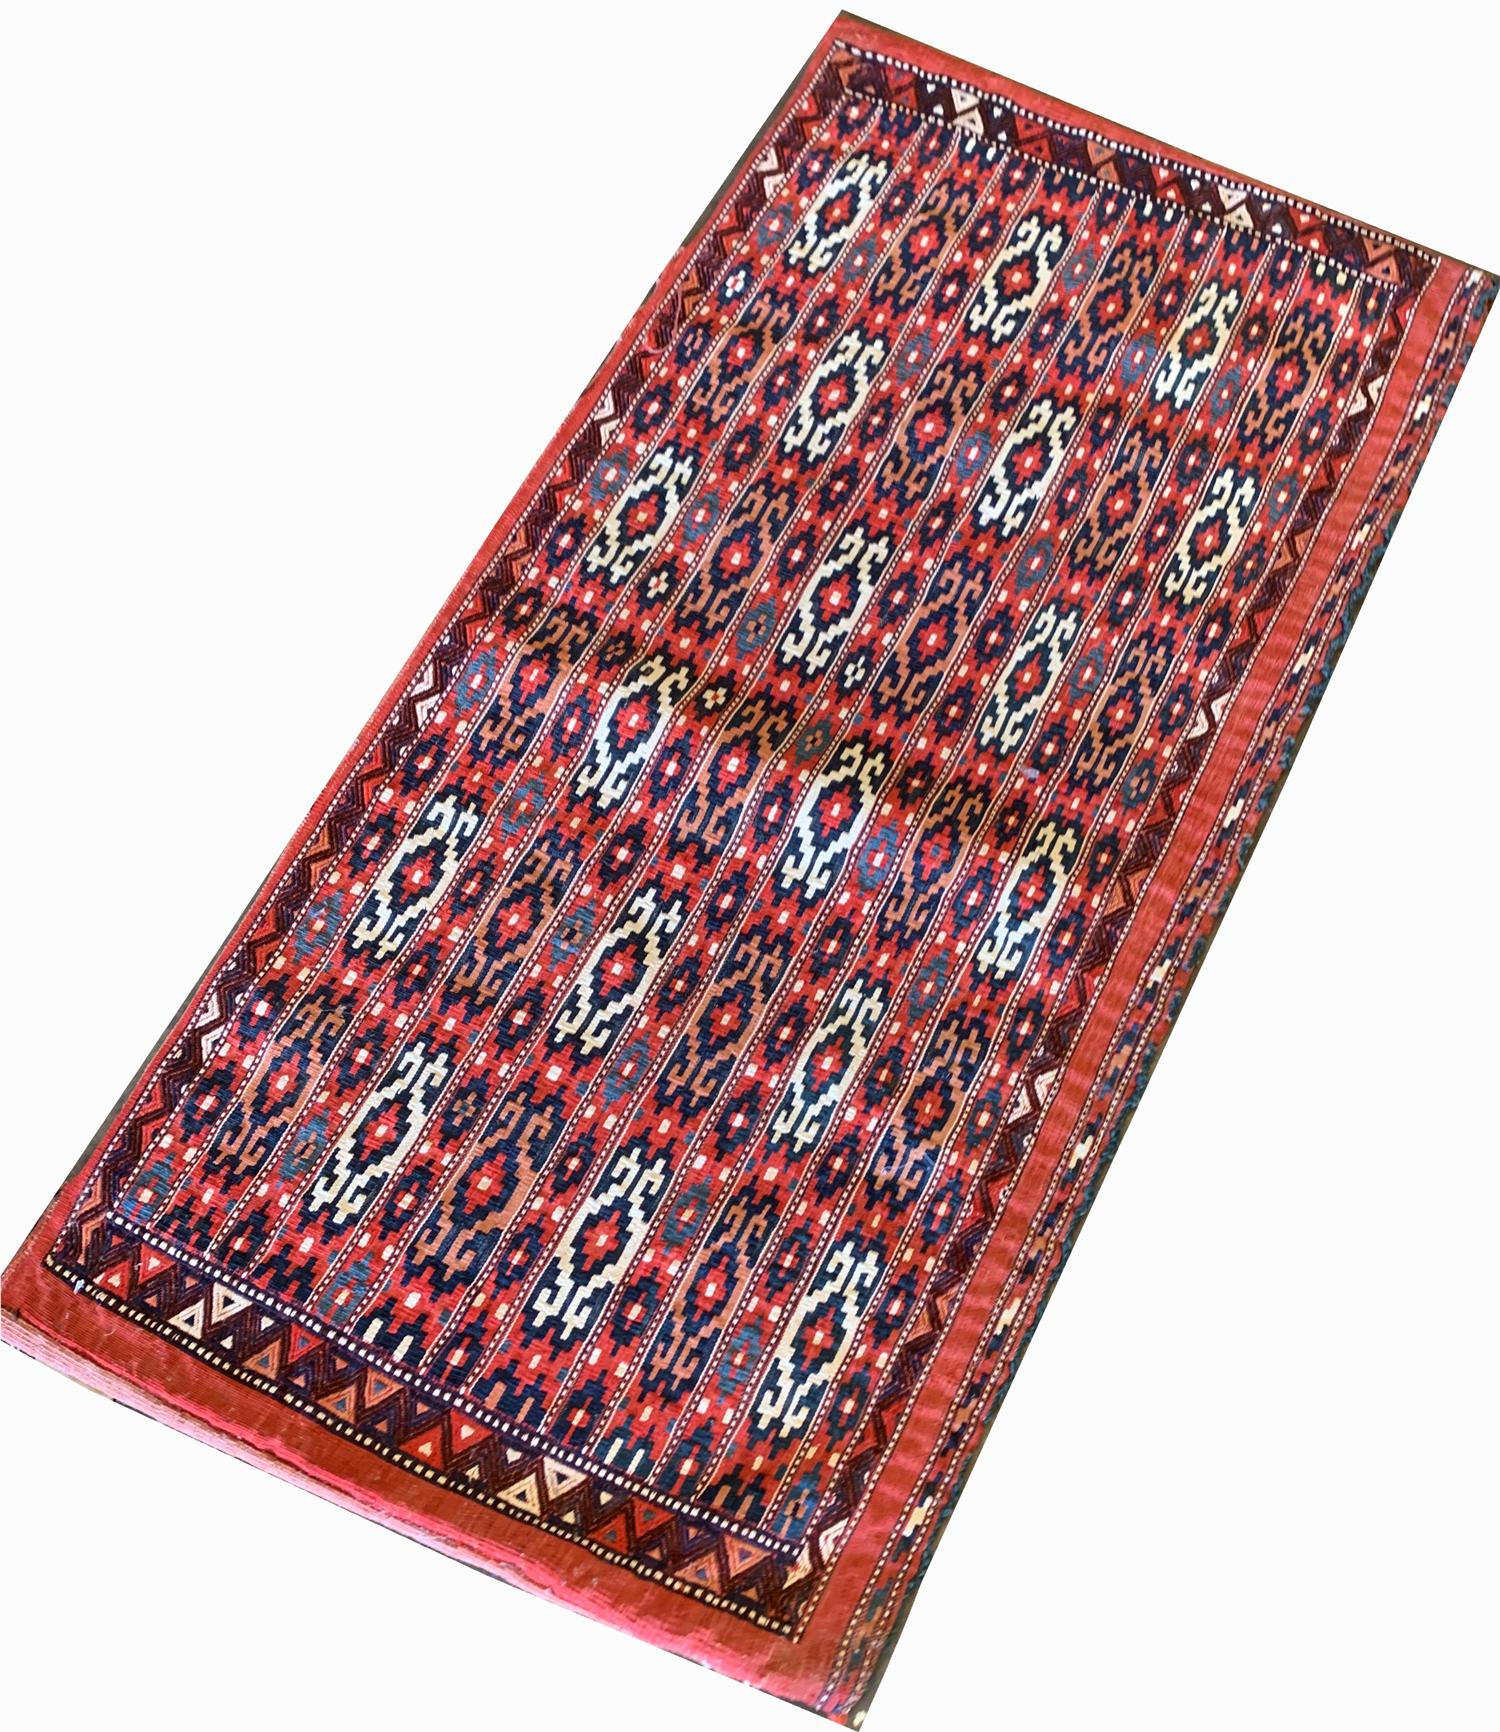 This elegant Turkmen geometric rug is an antique rug handwoven piece constructed in the 1880s with organic materials. The design features a bold red background with blue, orange and white accent colours that make up the geometric design. The design,